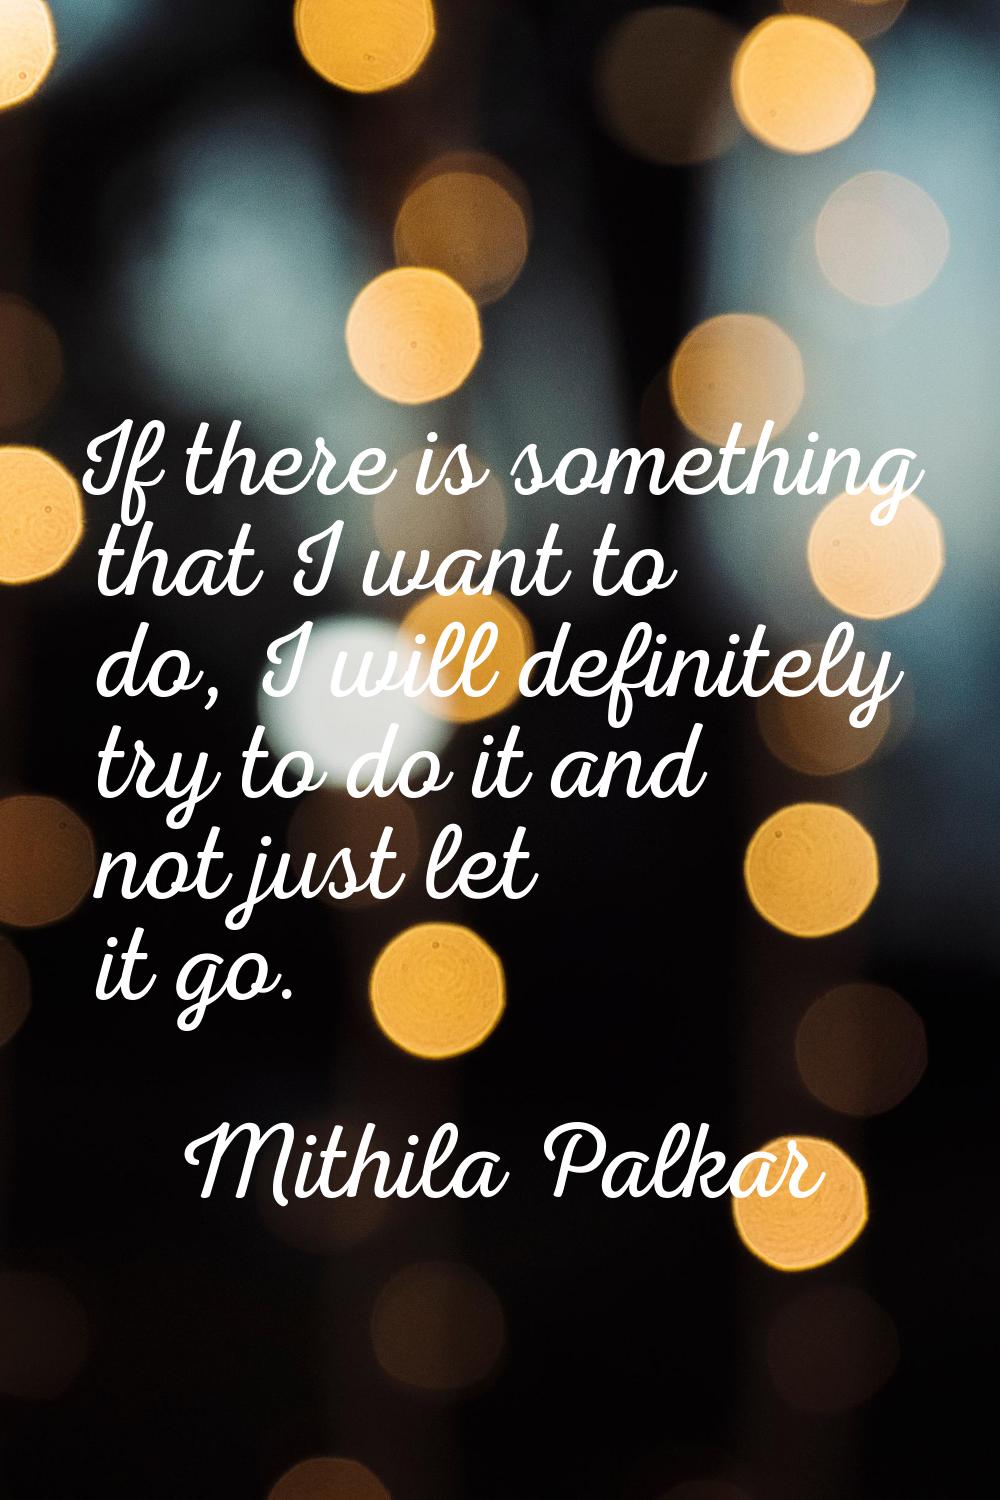 If there is something that I want to do, I will definitely try to do it and not just let it go.